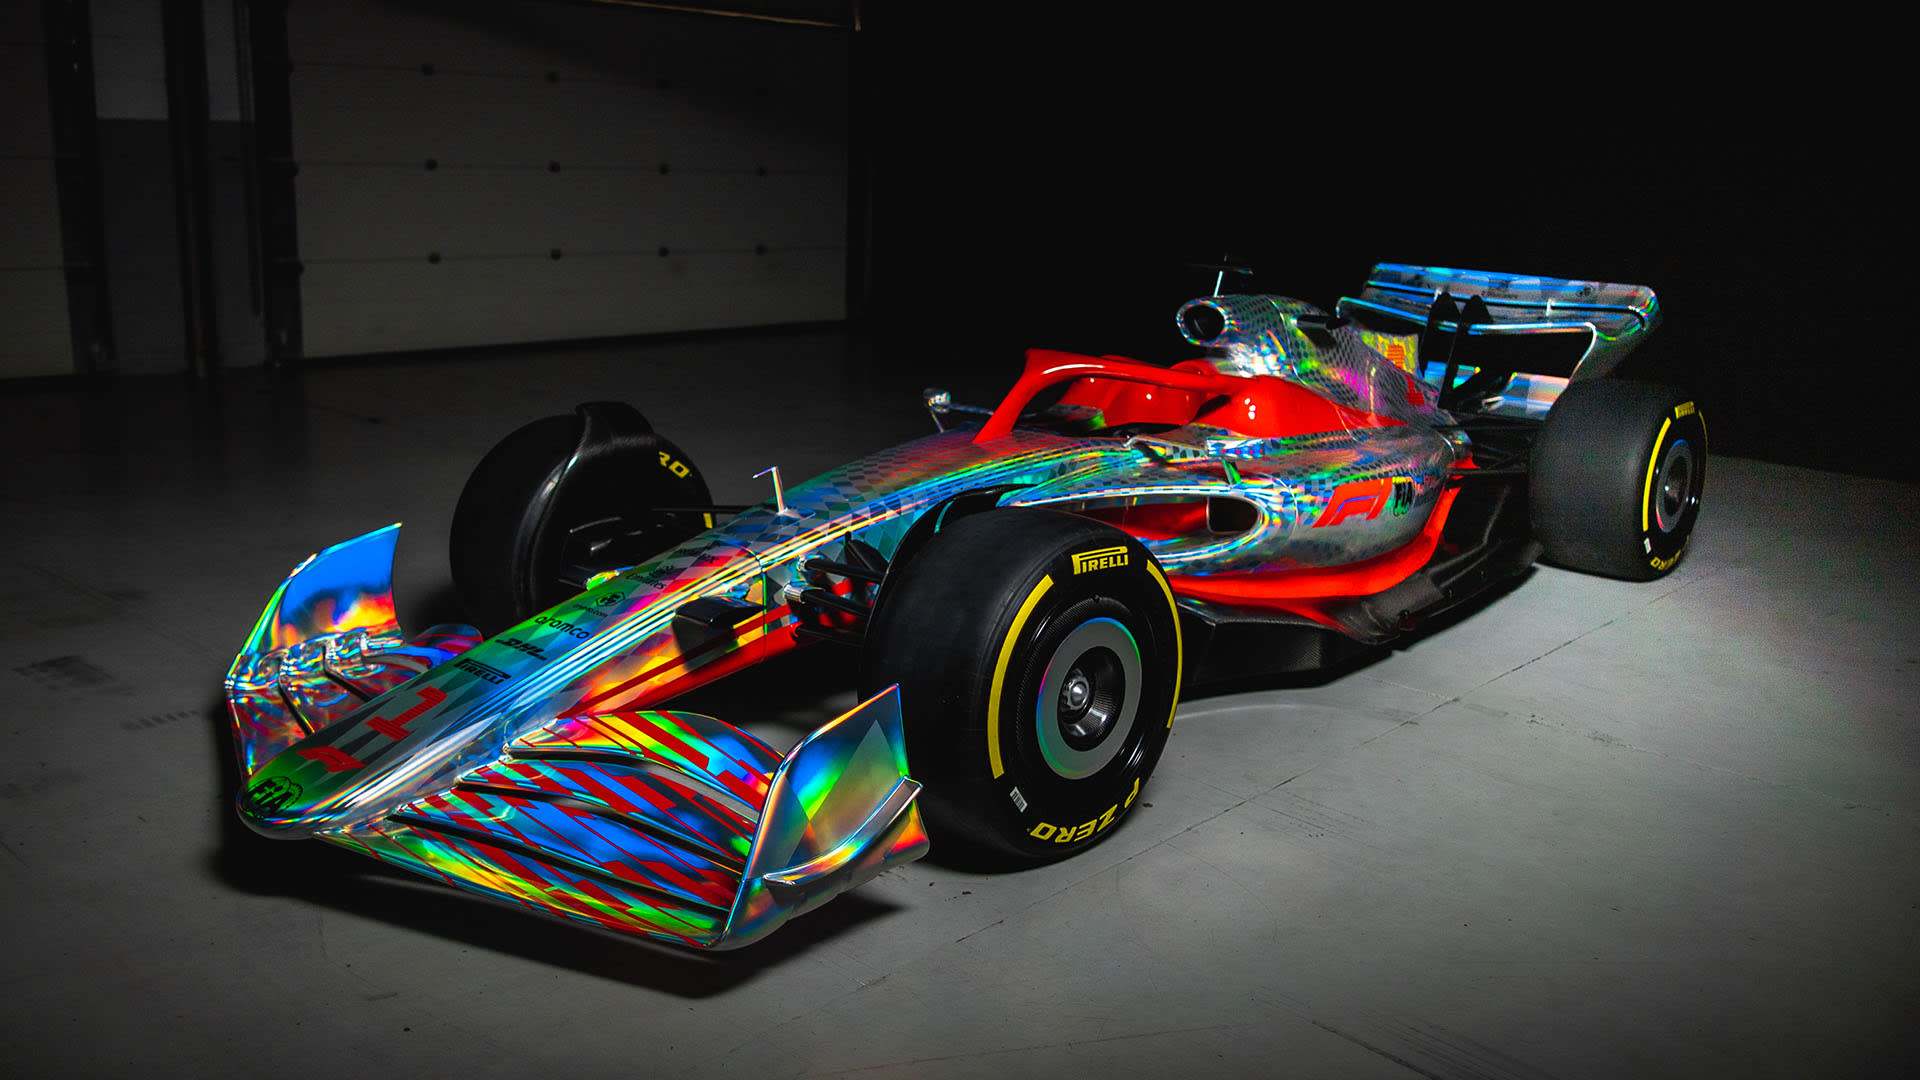 10 things you need to know about the all-new 2022 F1 car | Formula 1®